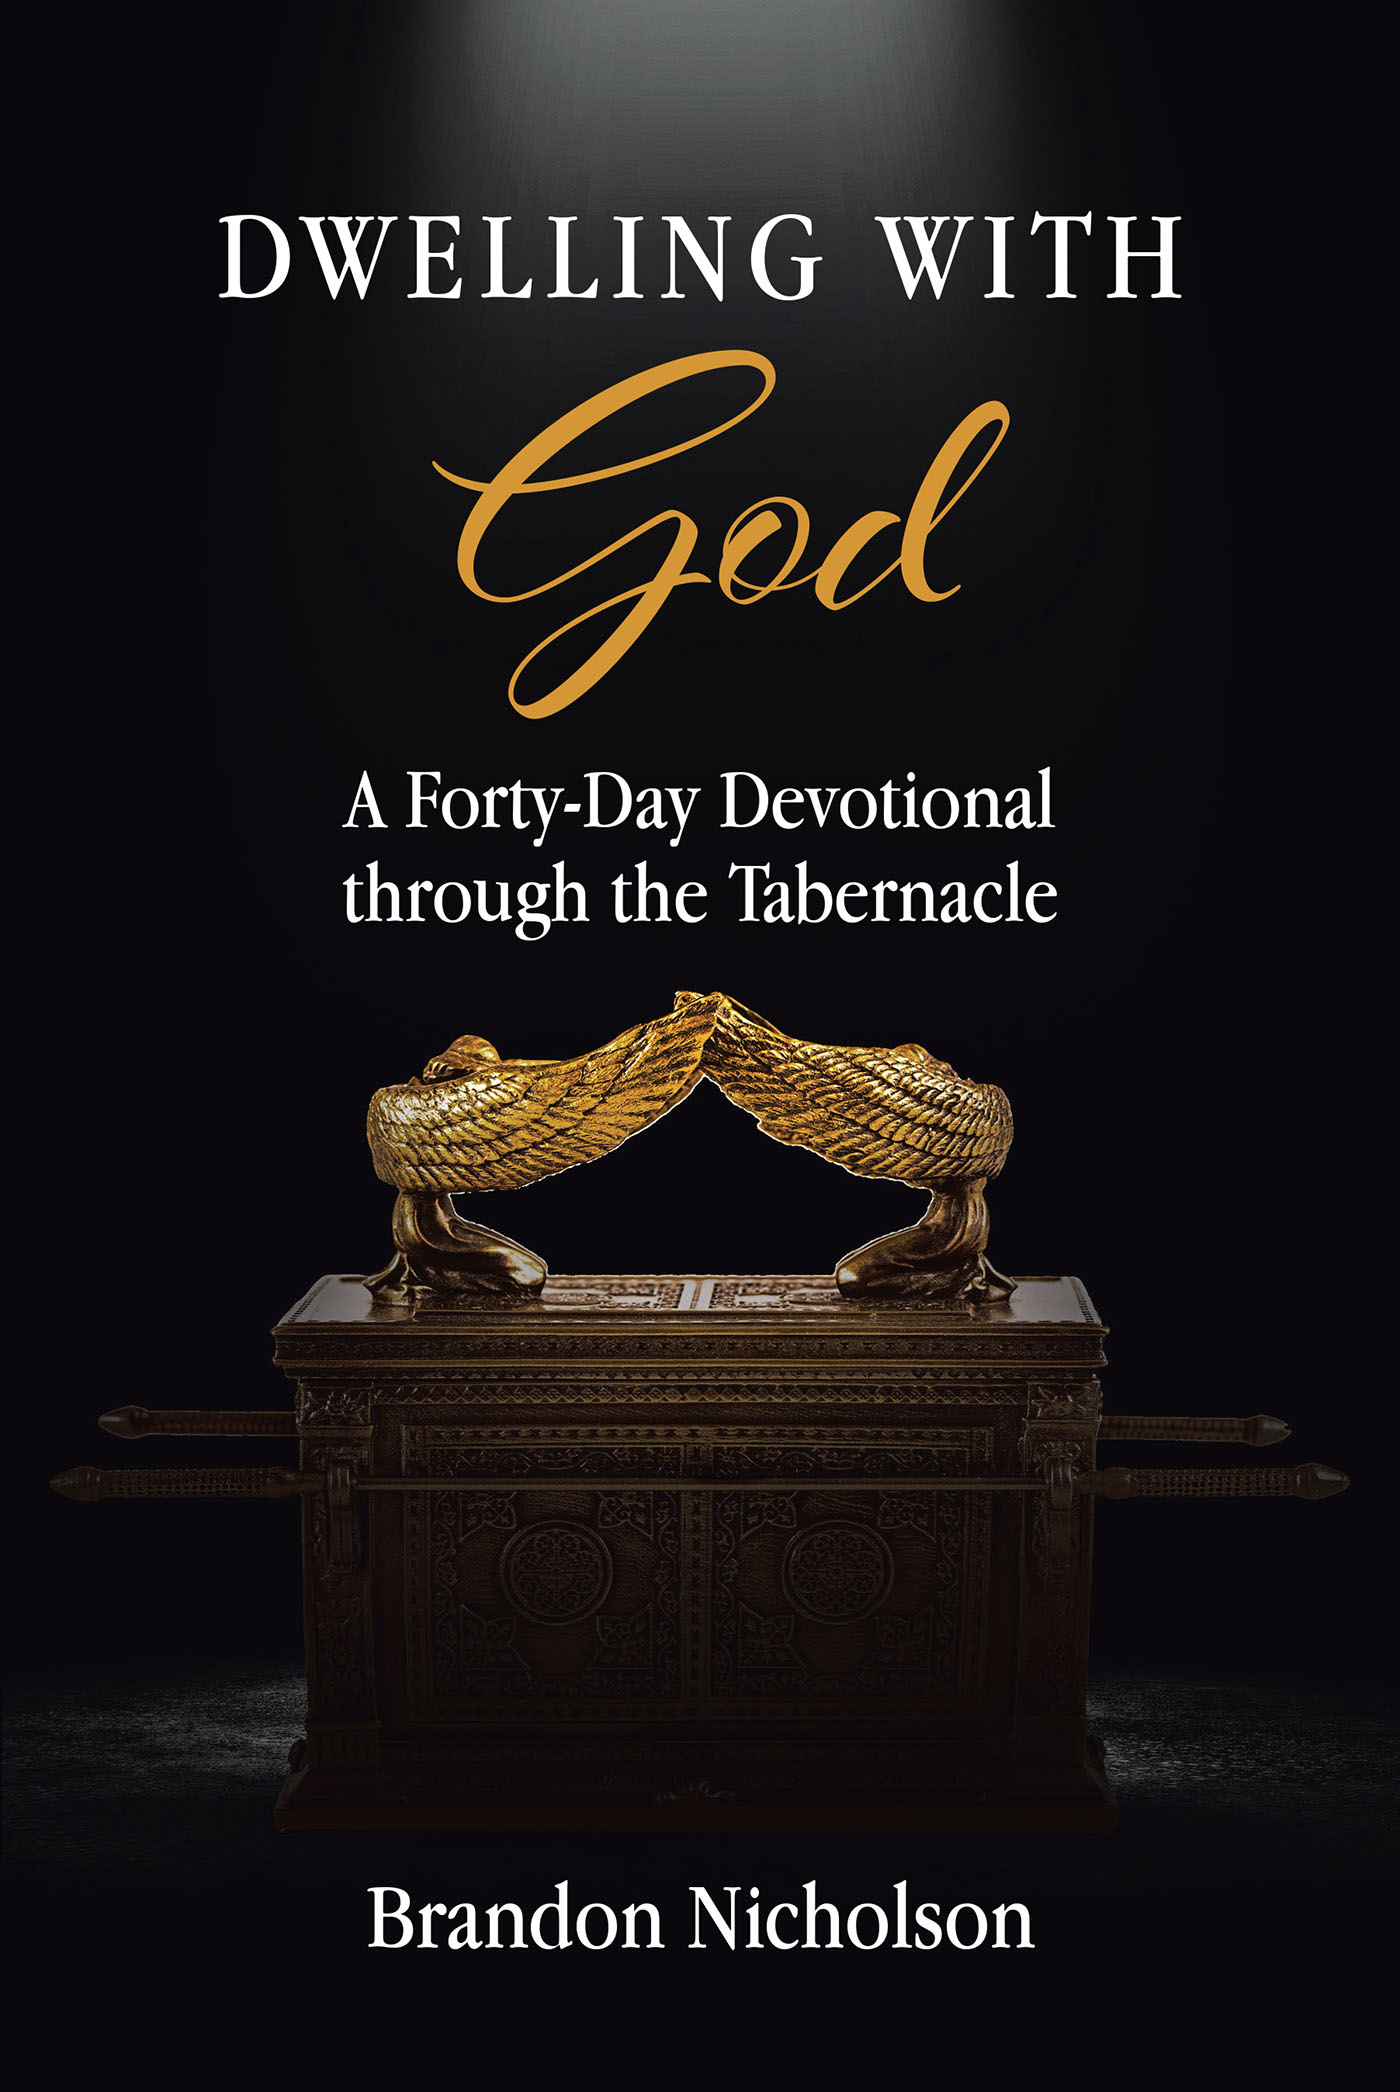 Brandon Nicholson’s Newly Released “Dwelling With God: A Forty-Day Devotional through the Tabernacle” is an Informative and Uplifting Opportunity for Growth